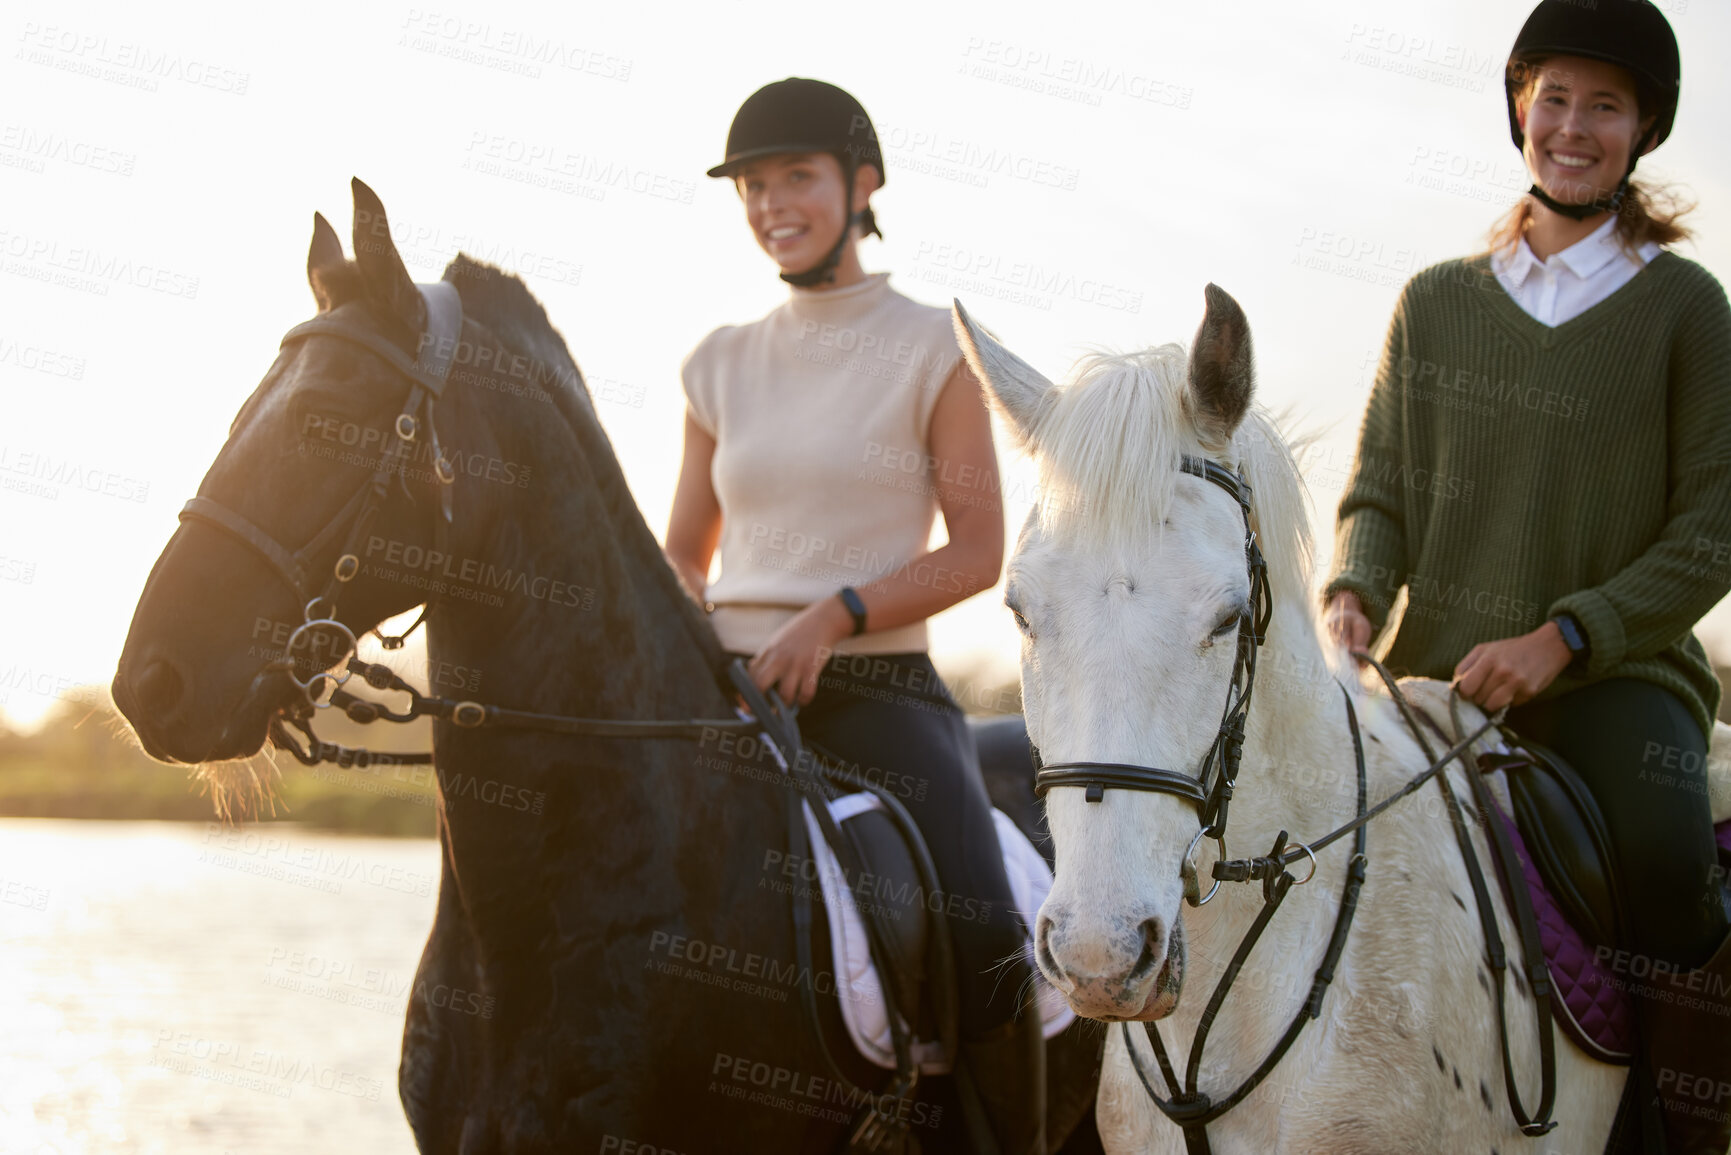 Buy stock photo Shot of two young women riding their horses outside on a field